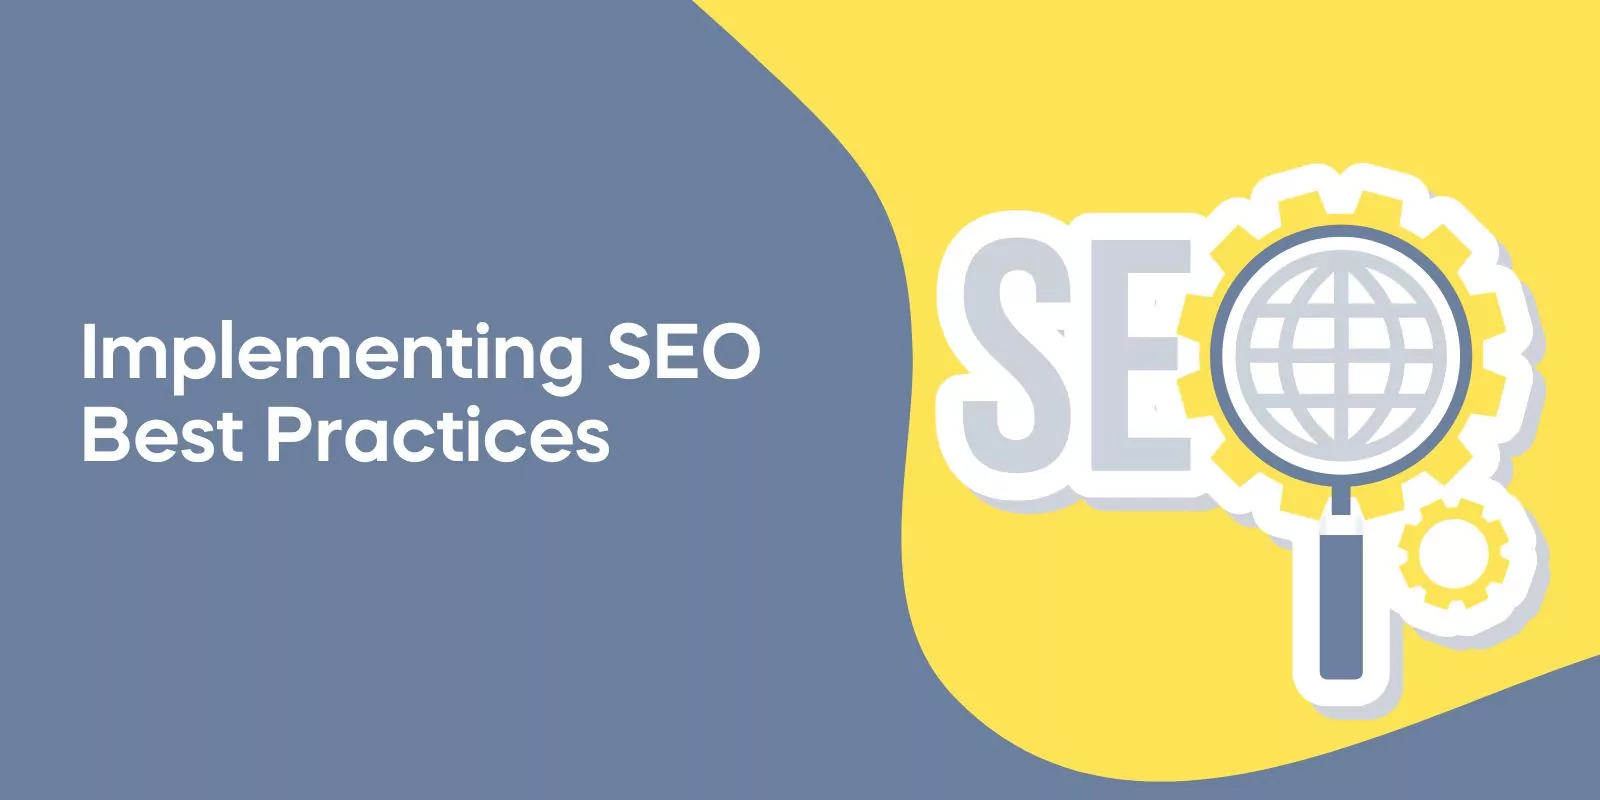 Implementing SEO Best Practices